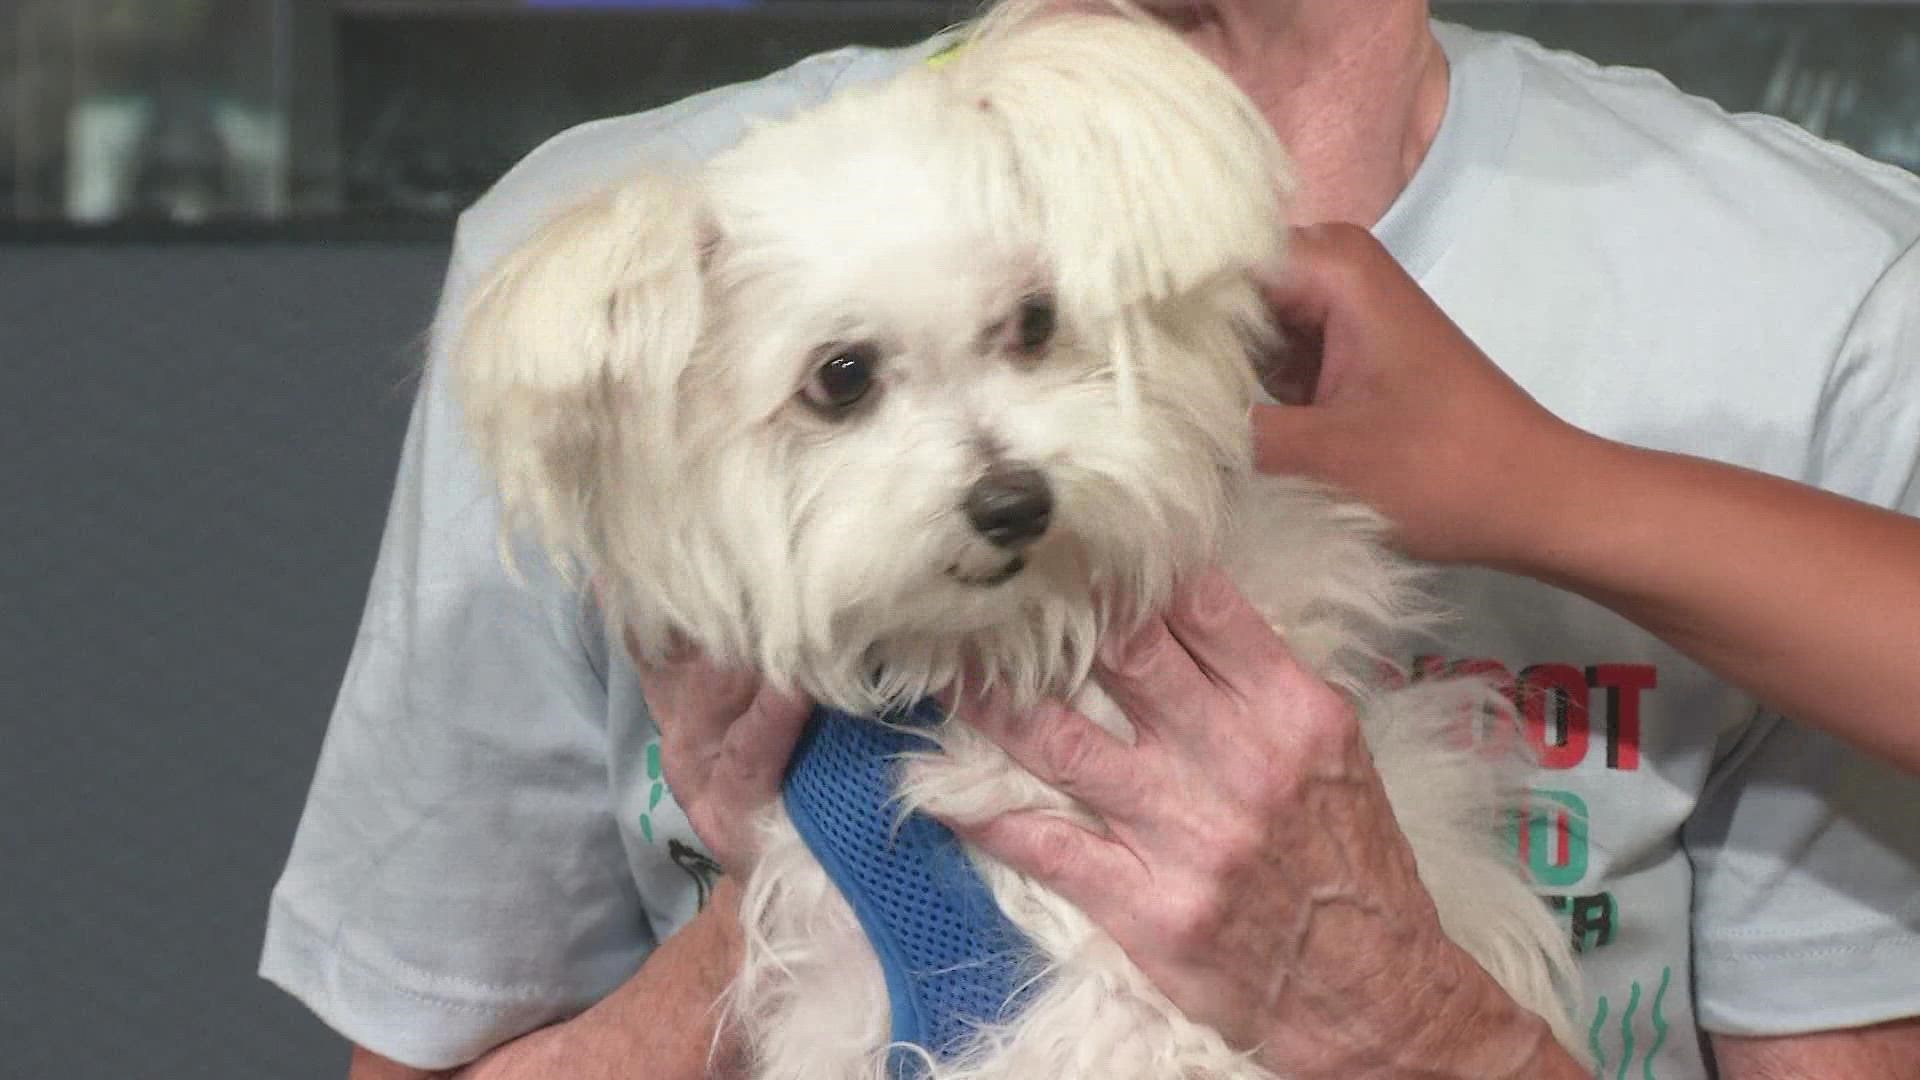 Meet Laz! He is up for adoption at the MaxFund Animal Adoption Center. He is a 12-year-old Chinese Crested Maltese.